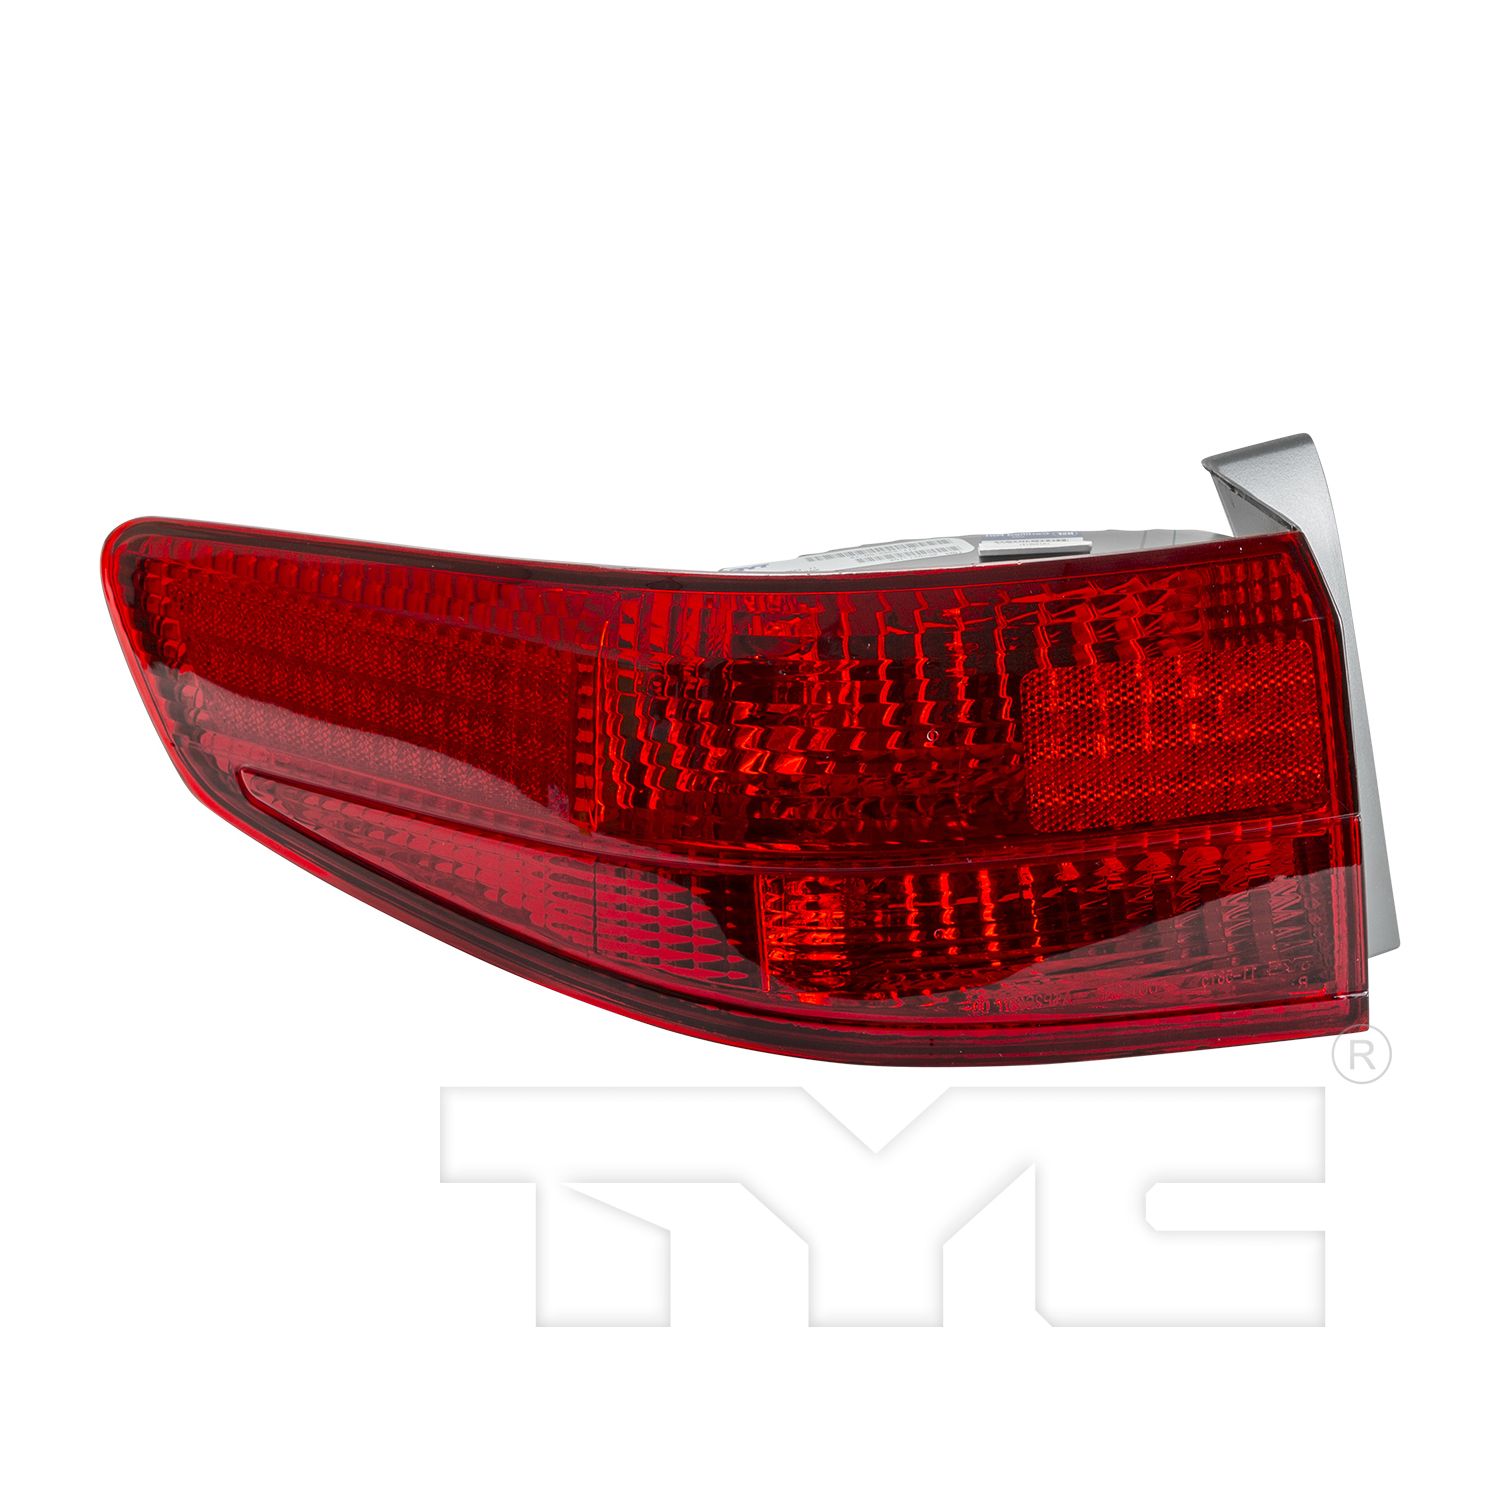 Aftermarket TAILLIGHTS for HONDA - ACCORD, ACCORD,05-05,LT Taillamp assy